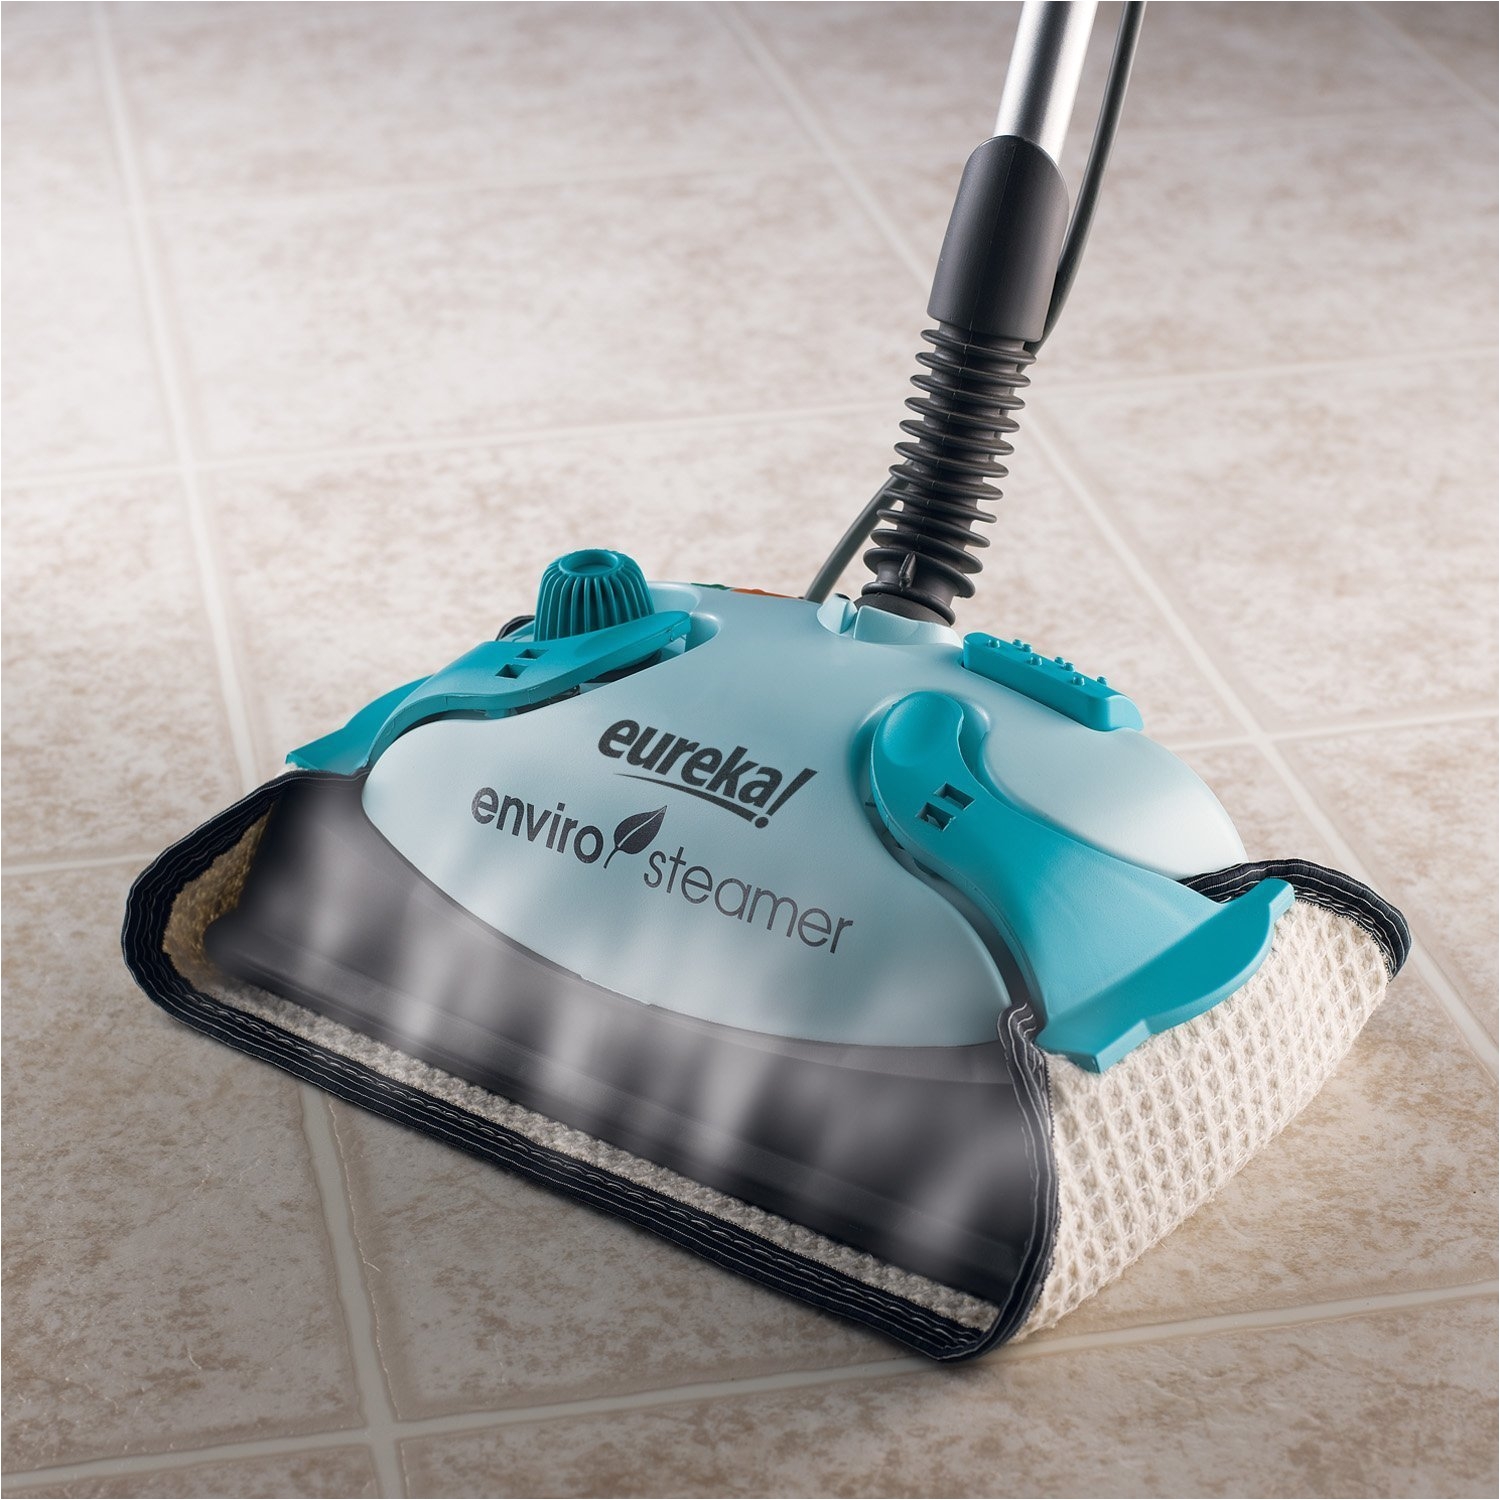 new steam cleaner for bathrooms and kitchens amazing bathroom idea amazing bathroom idea